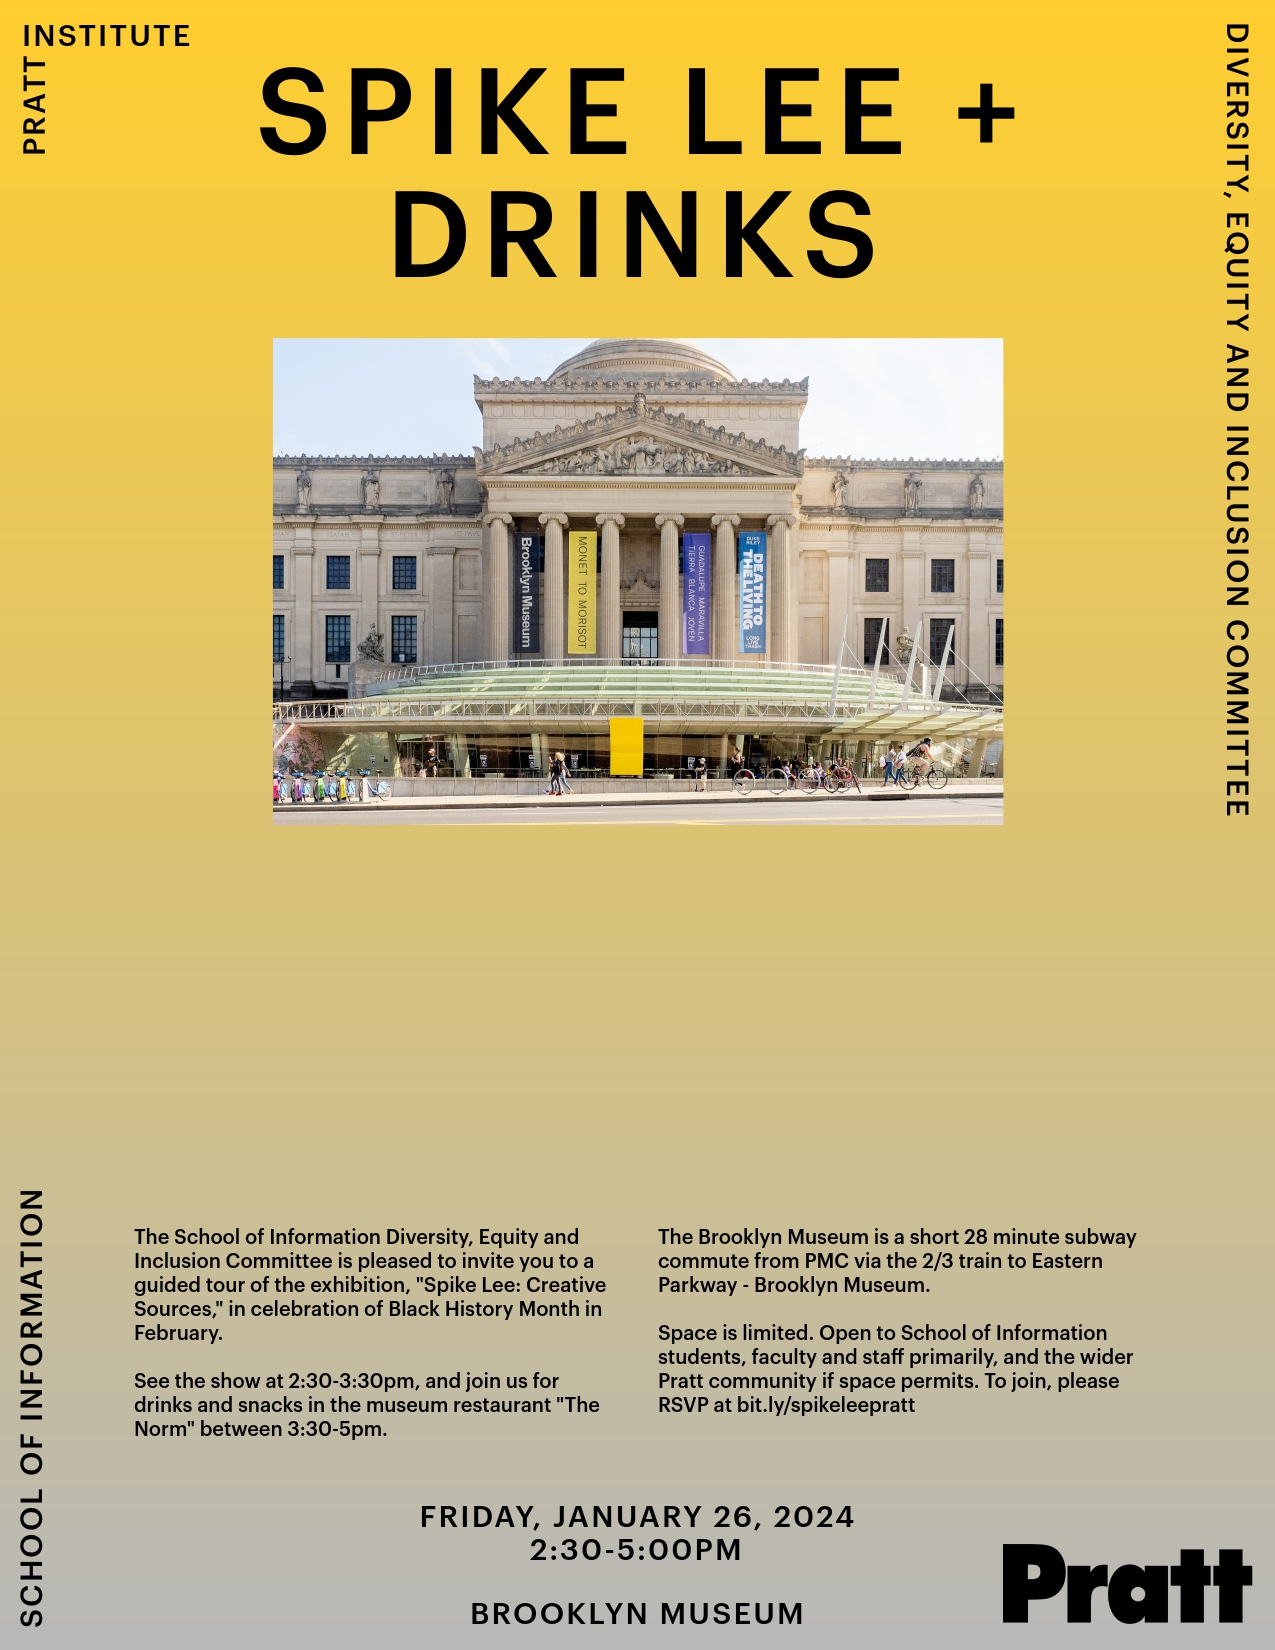 Event poster, with an image of the Brooklyn Museum and the event details.